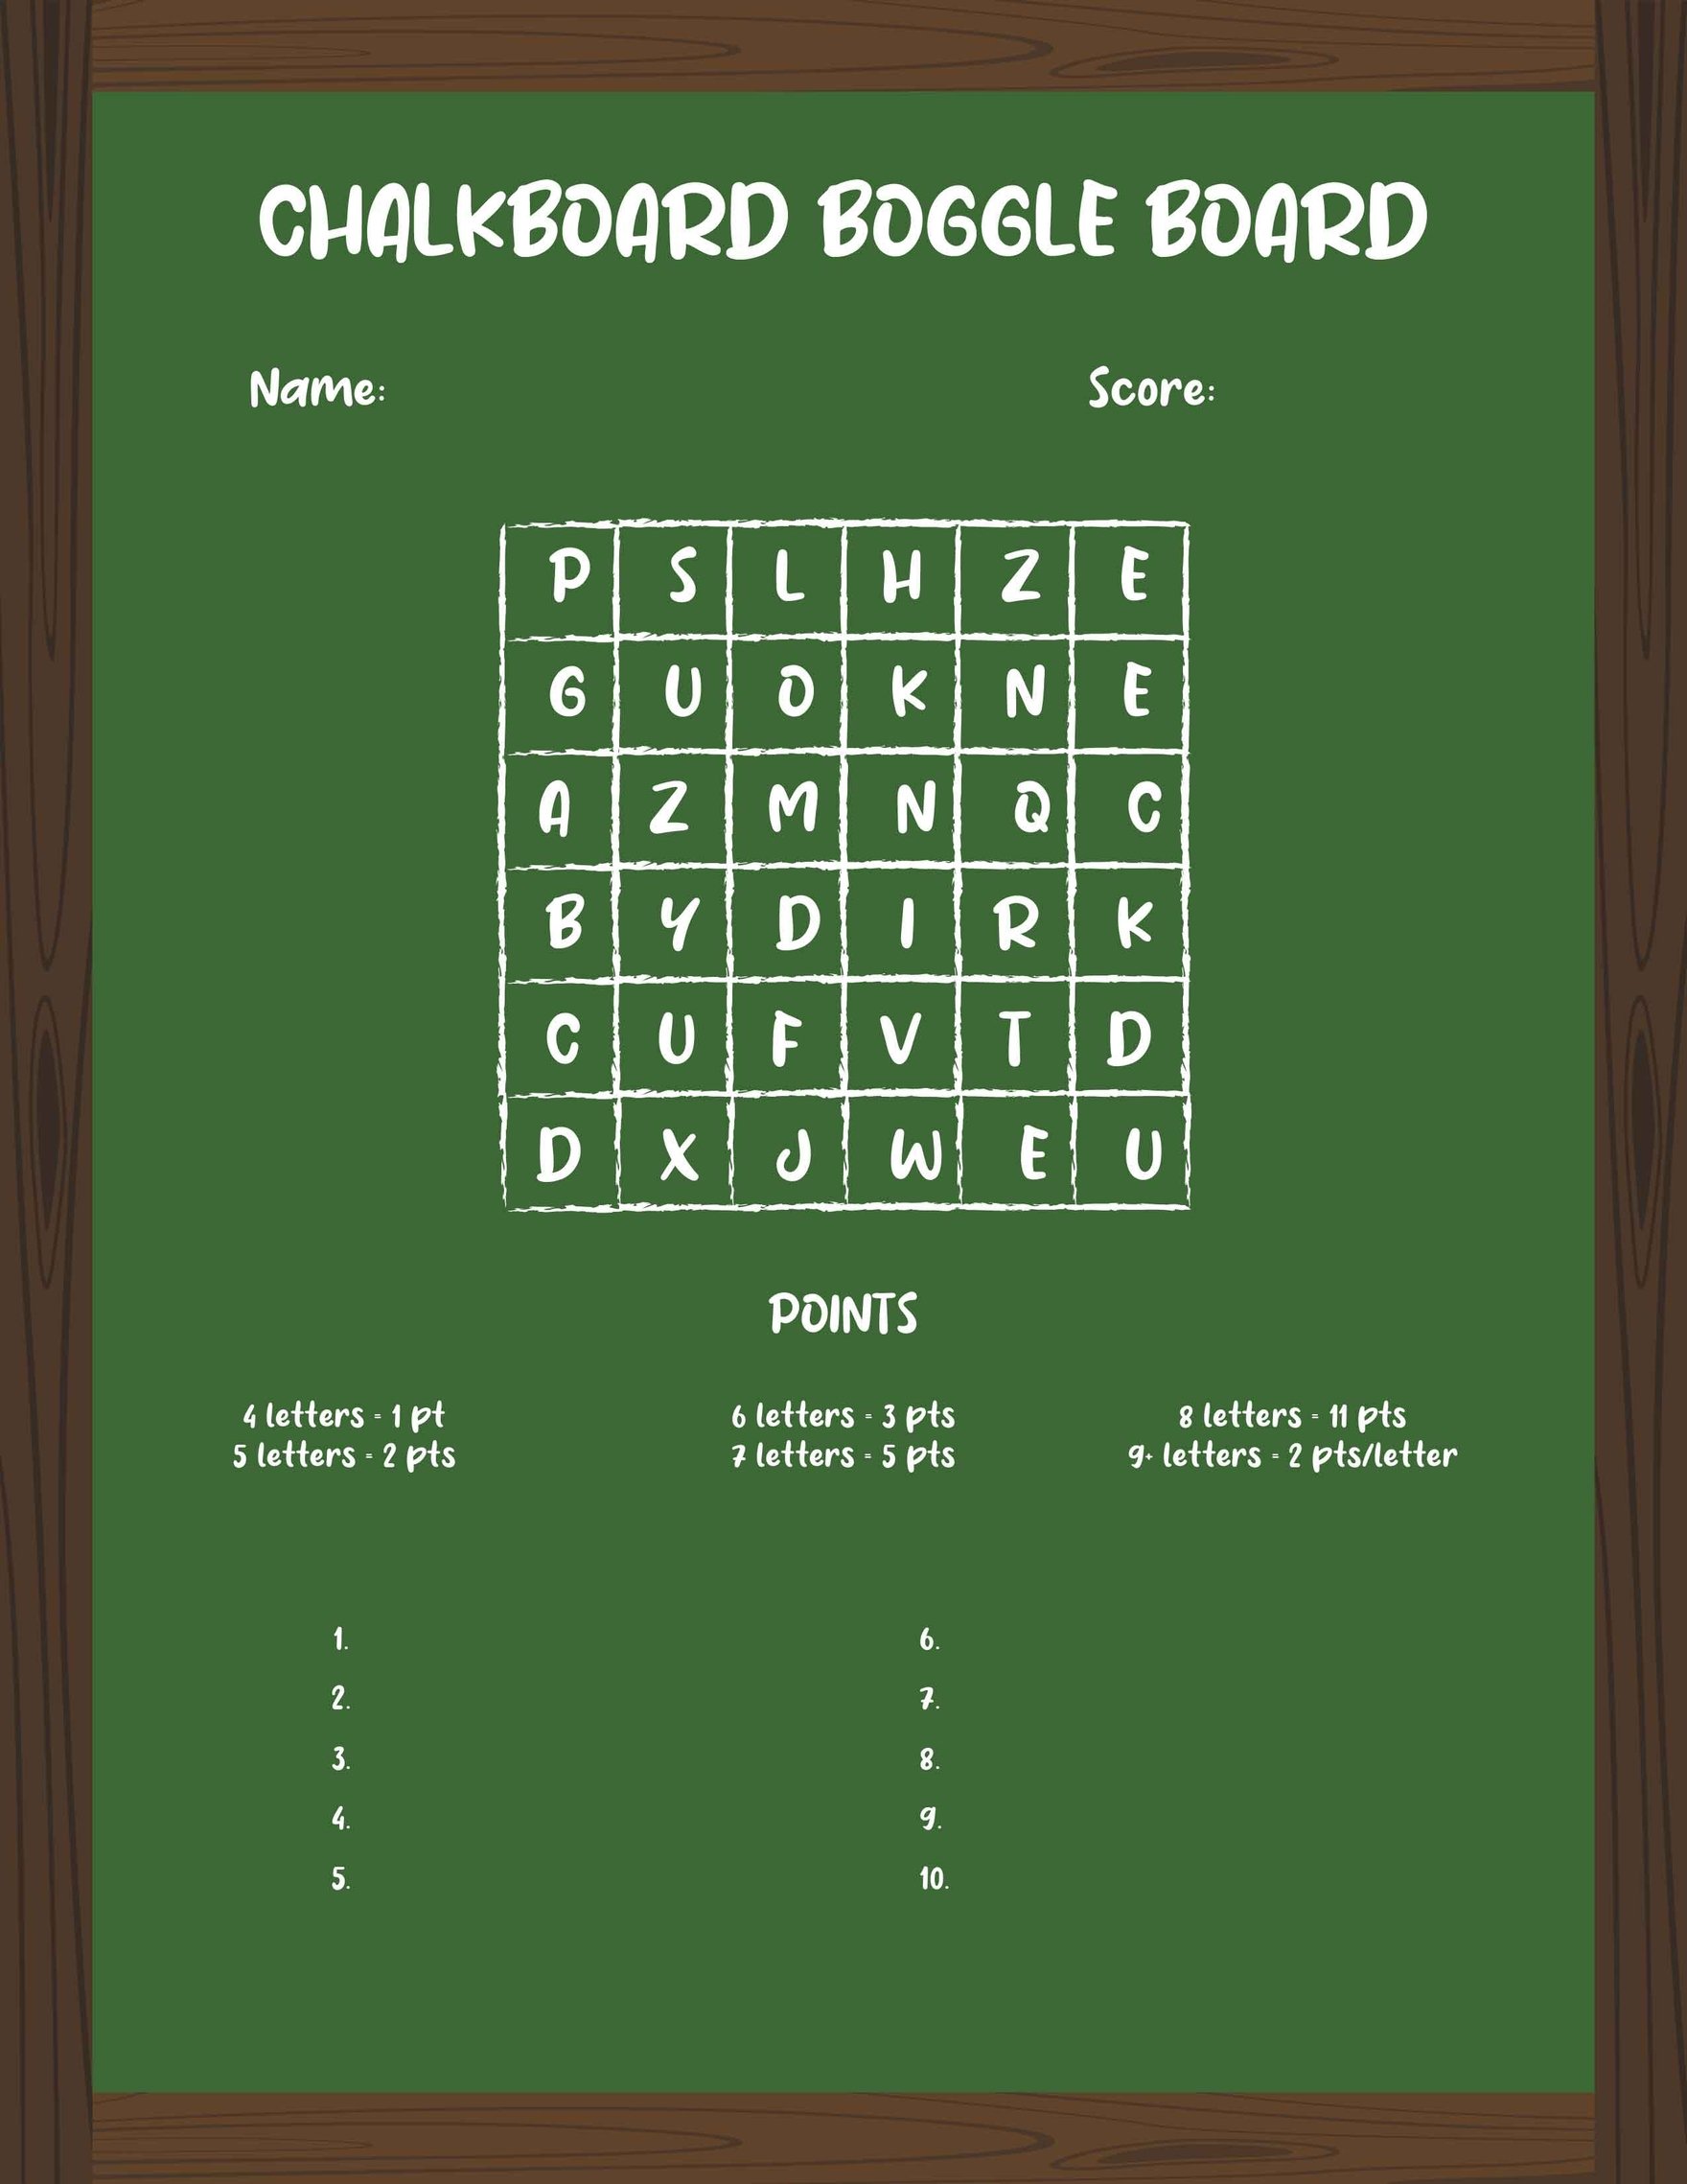 free-boggle-board-template-download-in-word-google-docs-pdf-apple